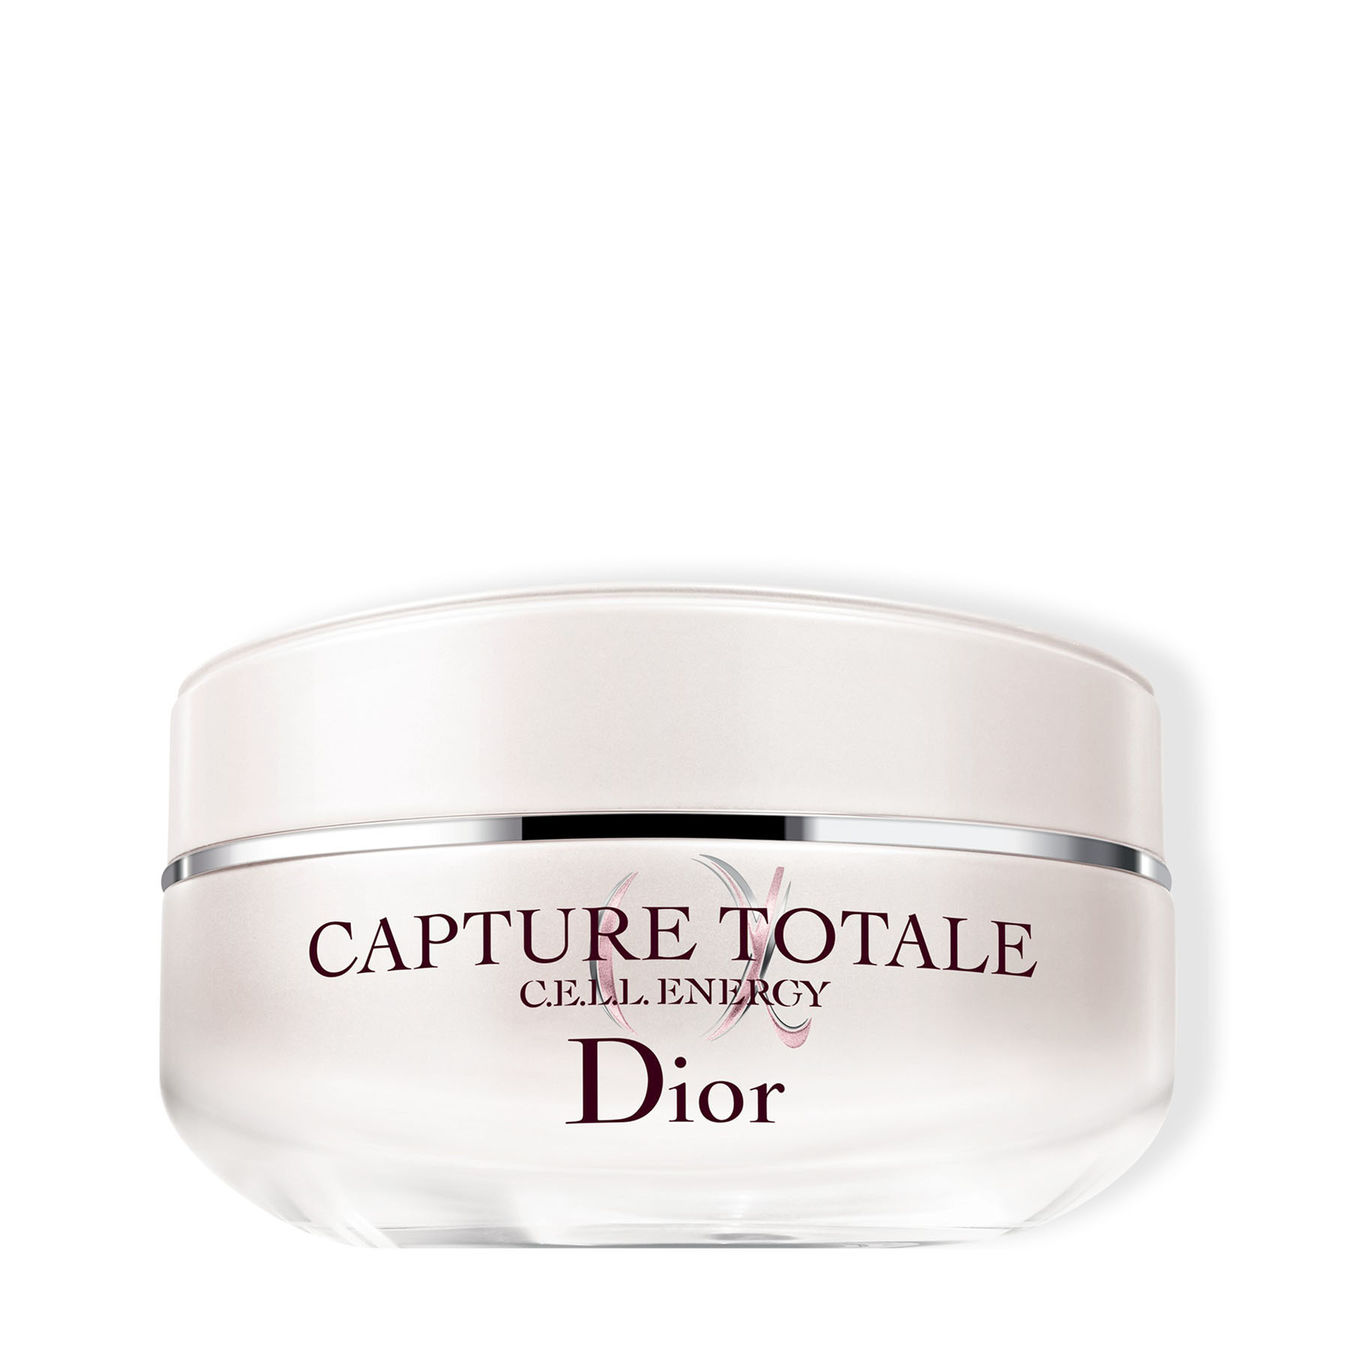 DIOR Capture Totale Cell Energy Firming & Wrinkle-Correcting Crème 50ml Damen von Dior